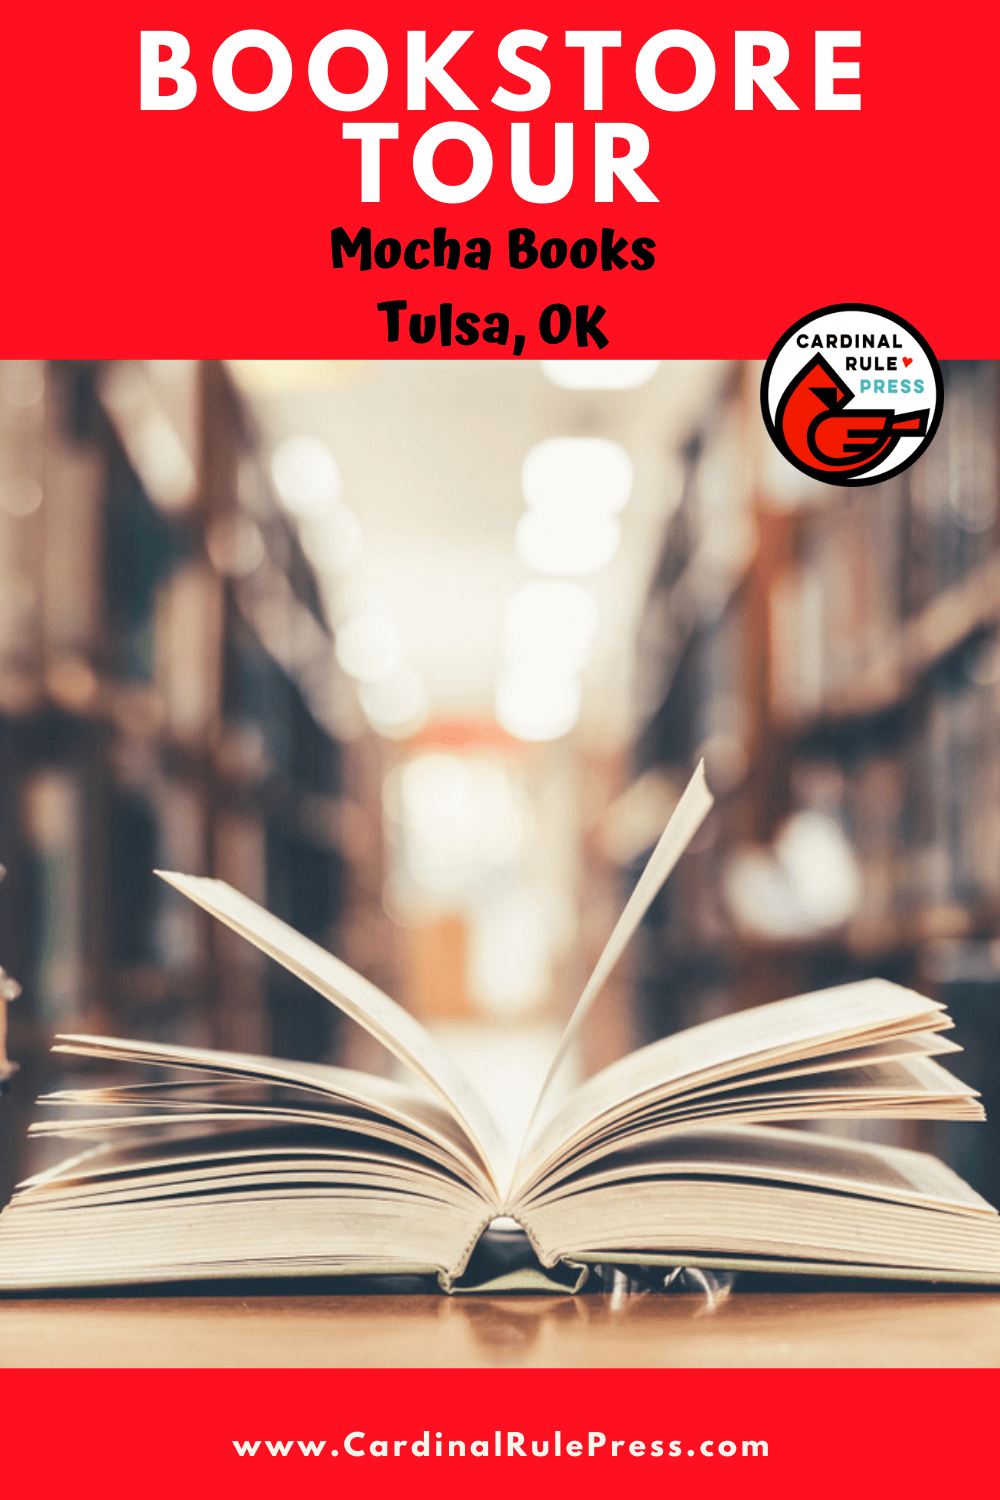 Bookstore Tour: Mocha Books in Tulsa, OK-We got to take an inside look into these creative spaces that house our favorite things---books and books and readers! #Bookstore #BookstoreTour #SummerTour